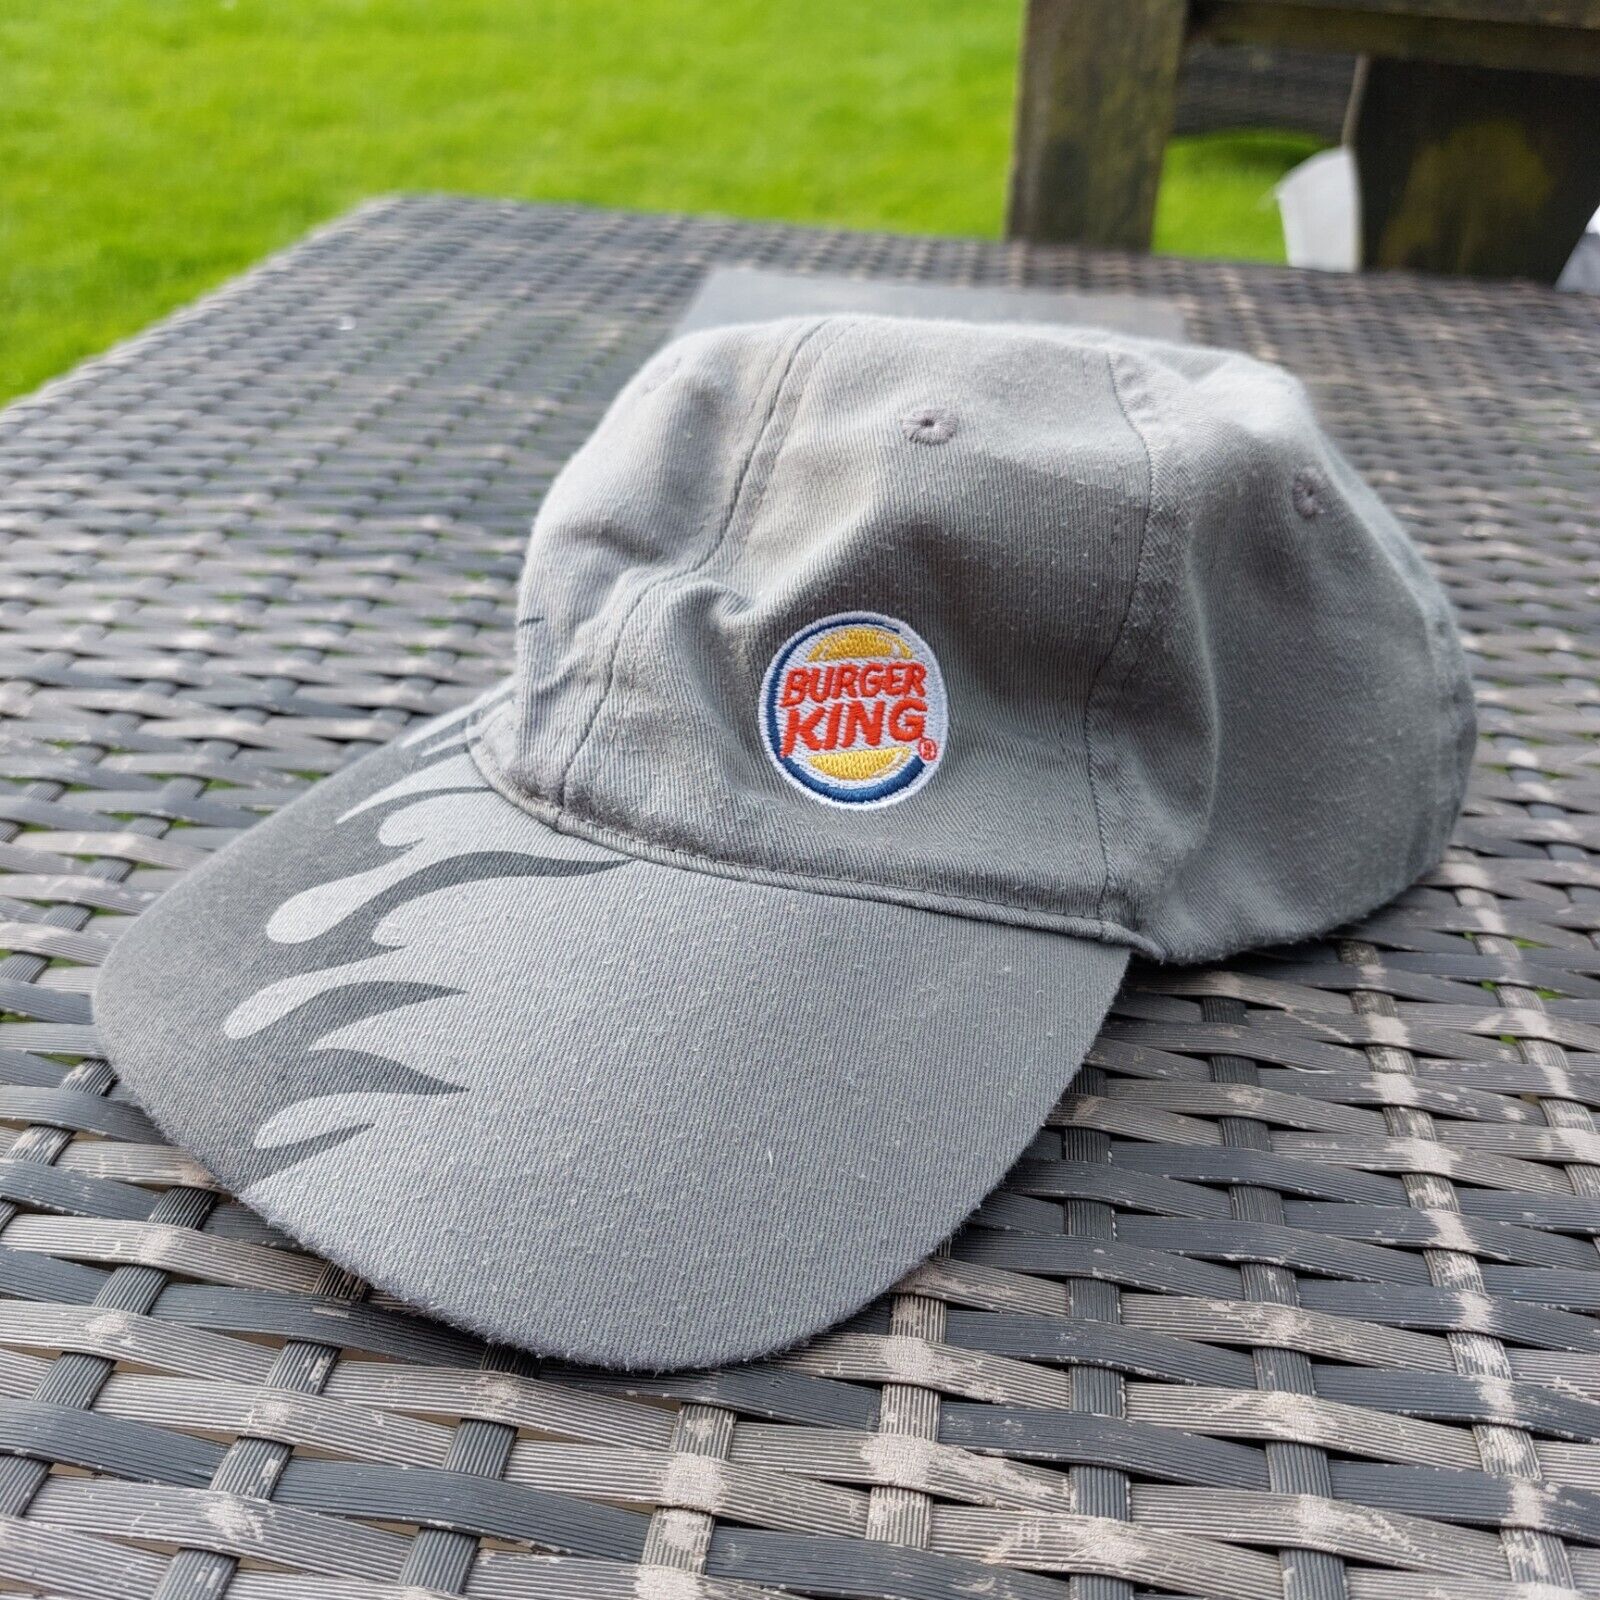 [Almaro] VTG Burger King - Official Workers Cap - GRILL MASTER - Flame Design